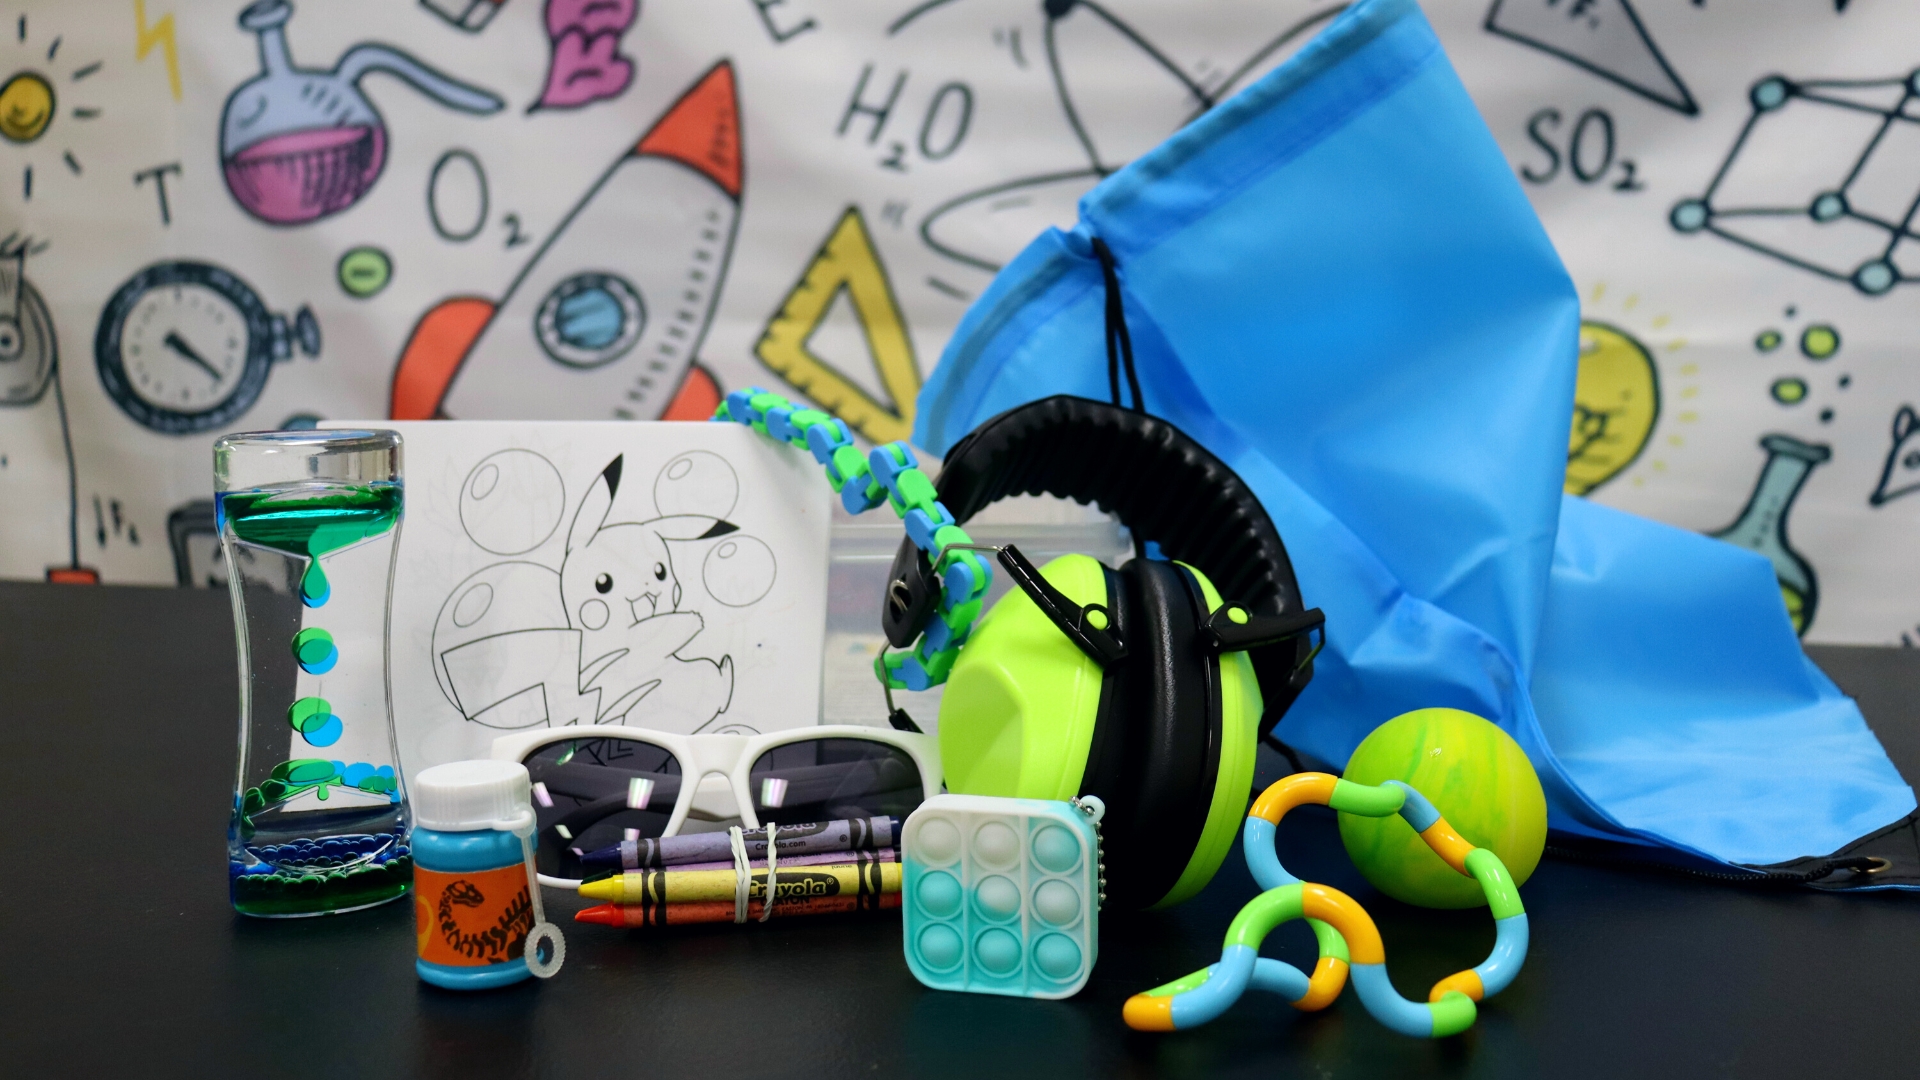 Sensory Friendly Learning Kits are available for check-out at the Discovery Center of Idaho during Sensory Hours.